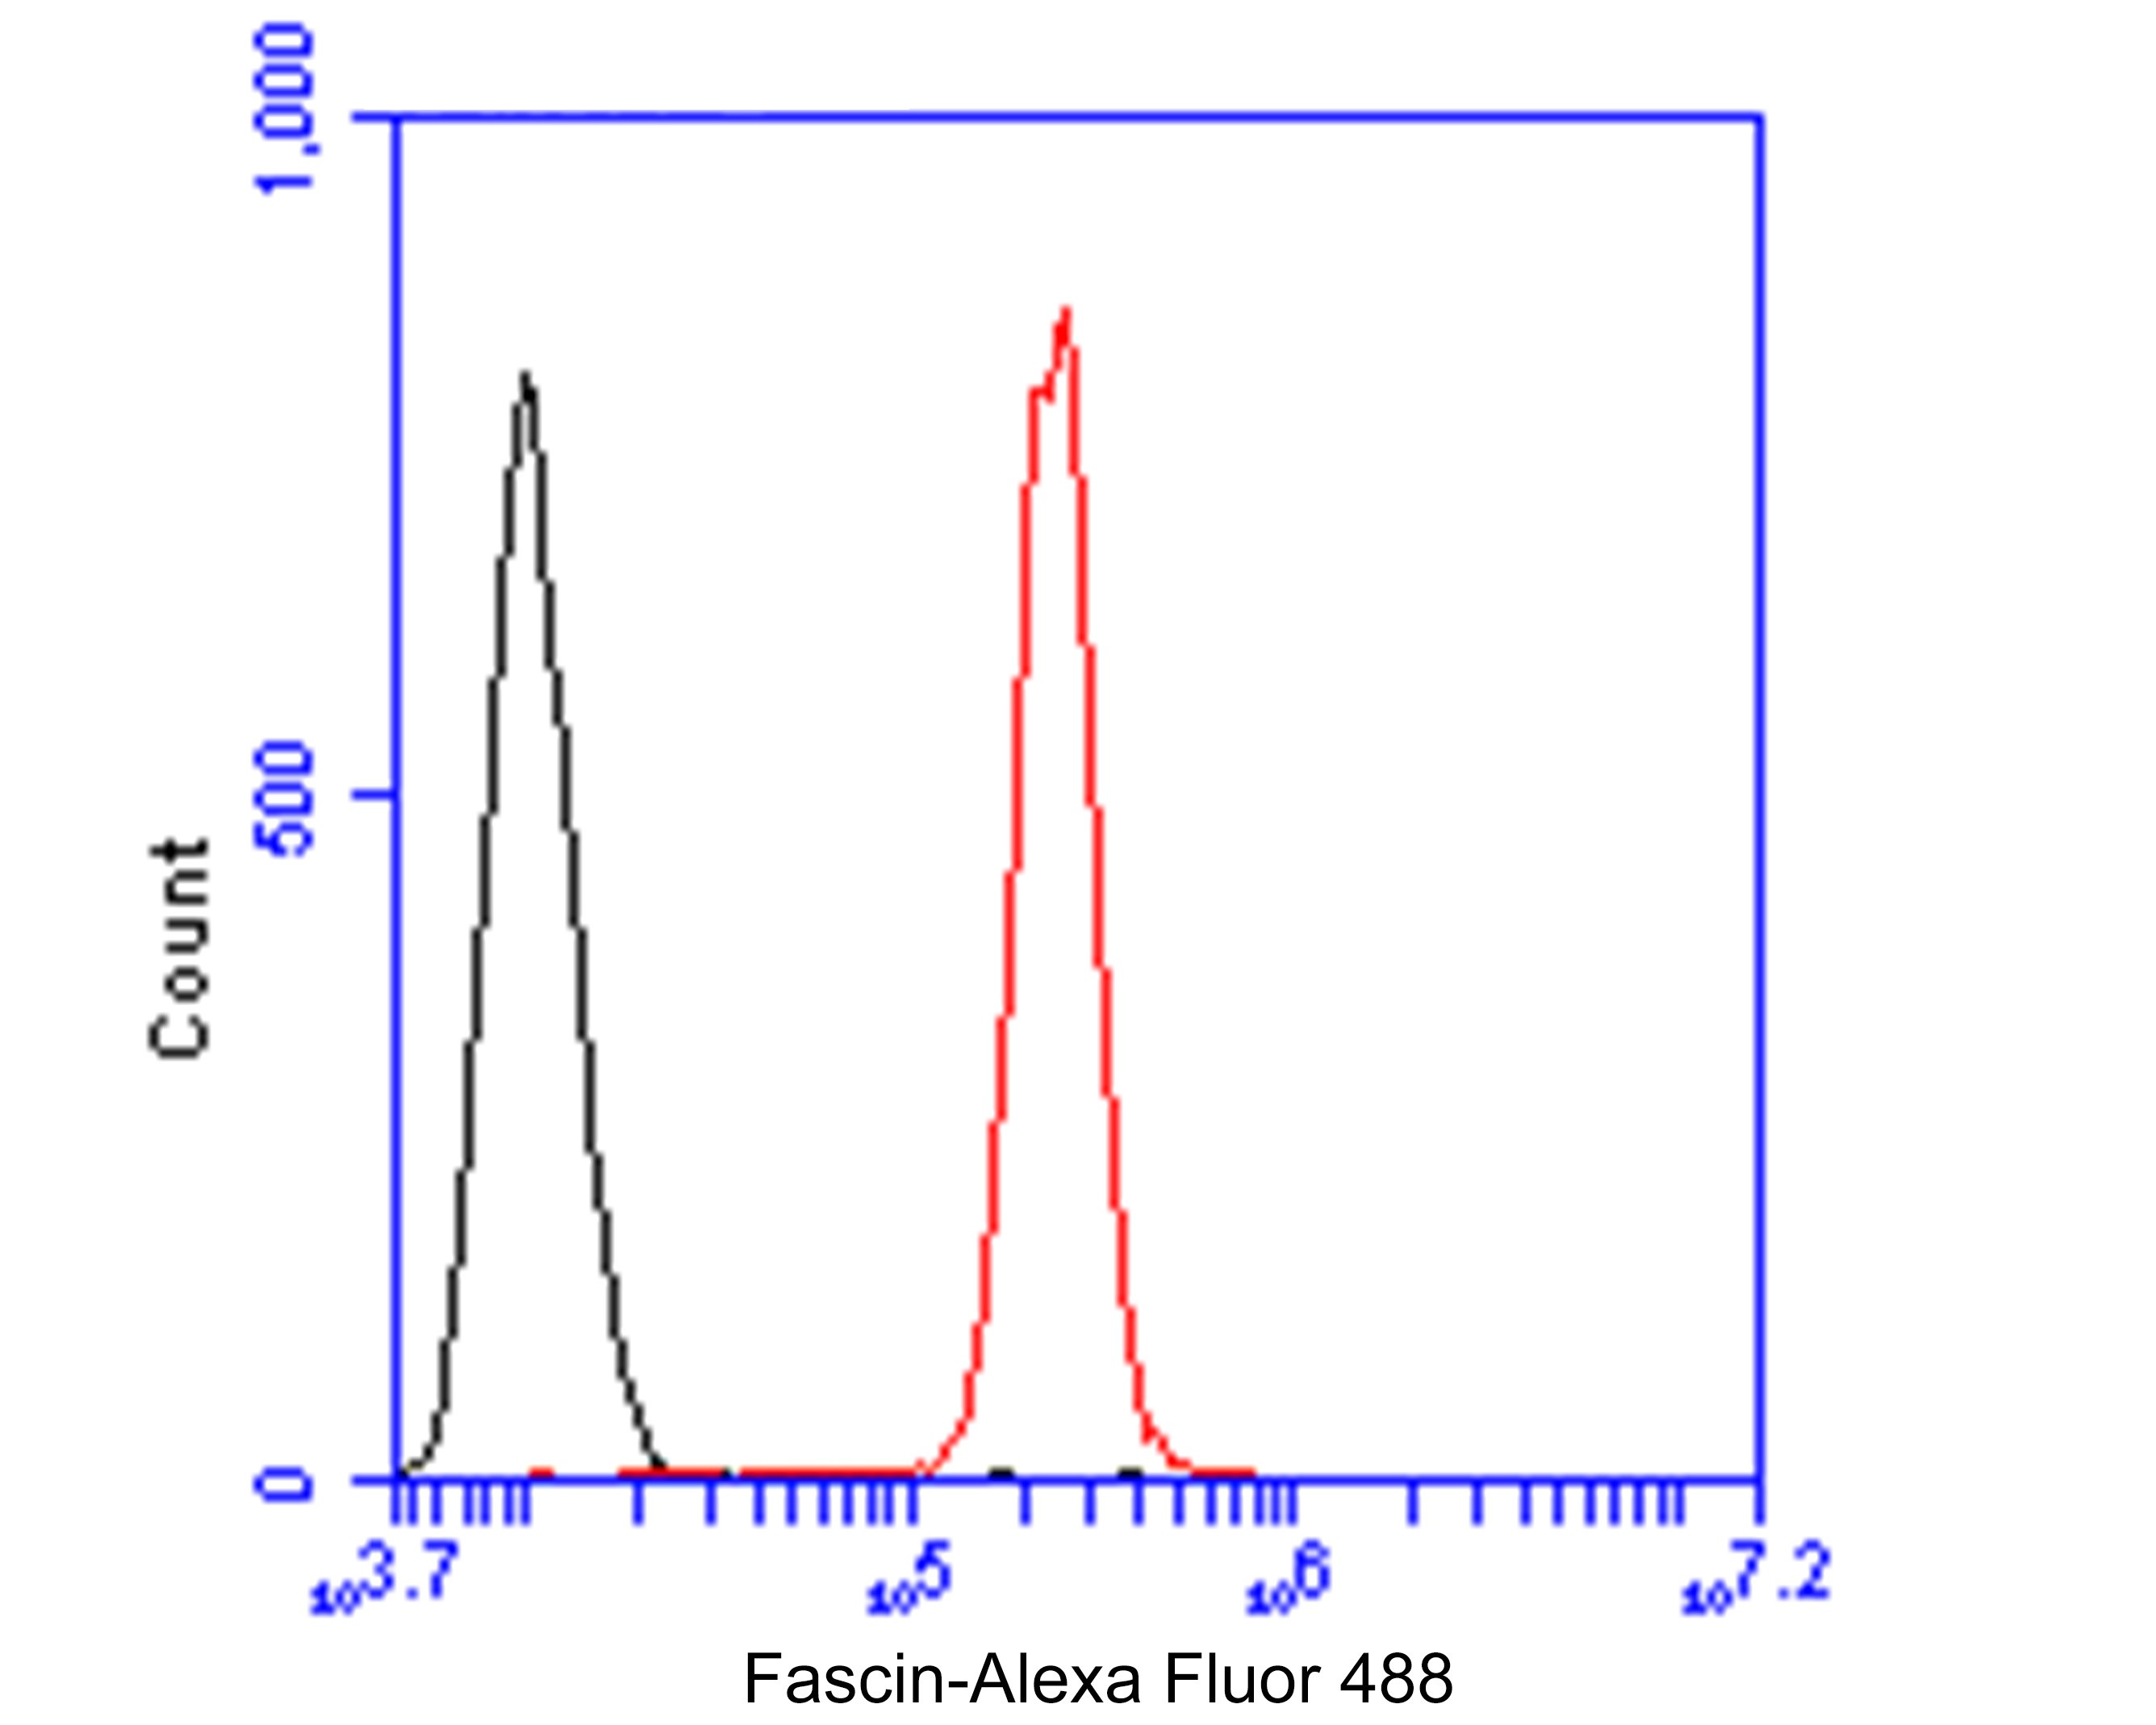 Flow cytometric analysis of Fascin was done on SHSY5Y cells. The cells were fixed, permeabilized and stained with the primary antibody (ER1901-71, 1/50) (red). After incubation of the primary antibody at room temperature for an hour, the cells were stained with a Alexa Fluor 488-conjugated Goat anti-Rabbit IgG Secondary antibody at 1/1000 dilution for 30 minutes.Unlabelled sample was used as a control (cells without incubation with primary antibody; black).